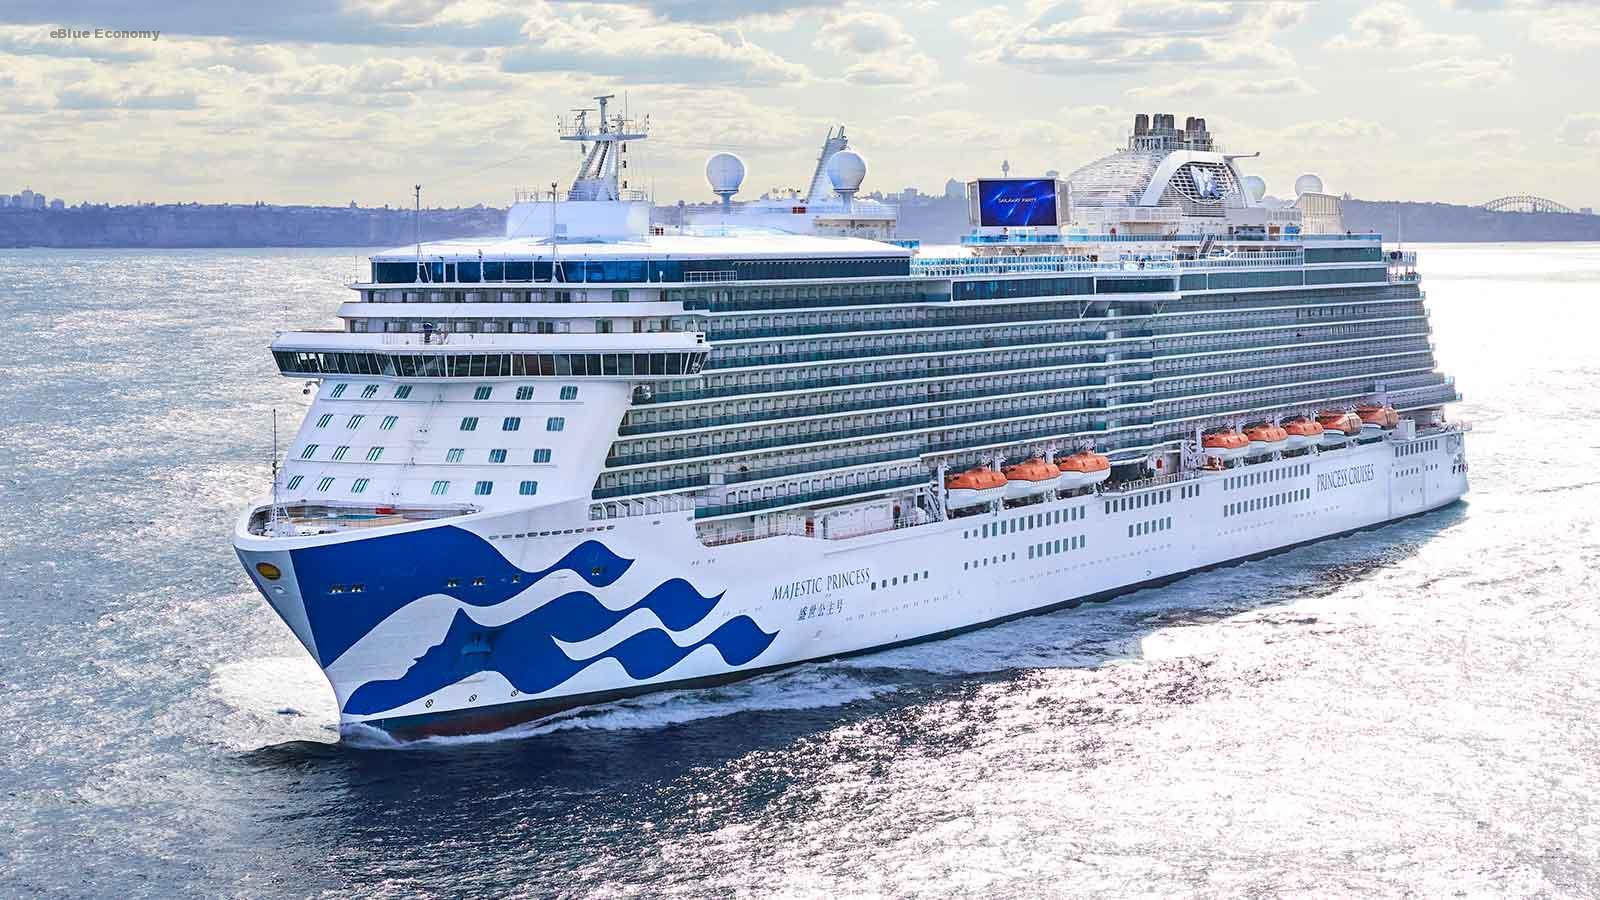 eBlue_economy_Princess Cruises Extends Pause of Cruise Vacations in Australia Through Mid-January 2022